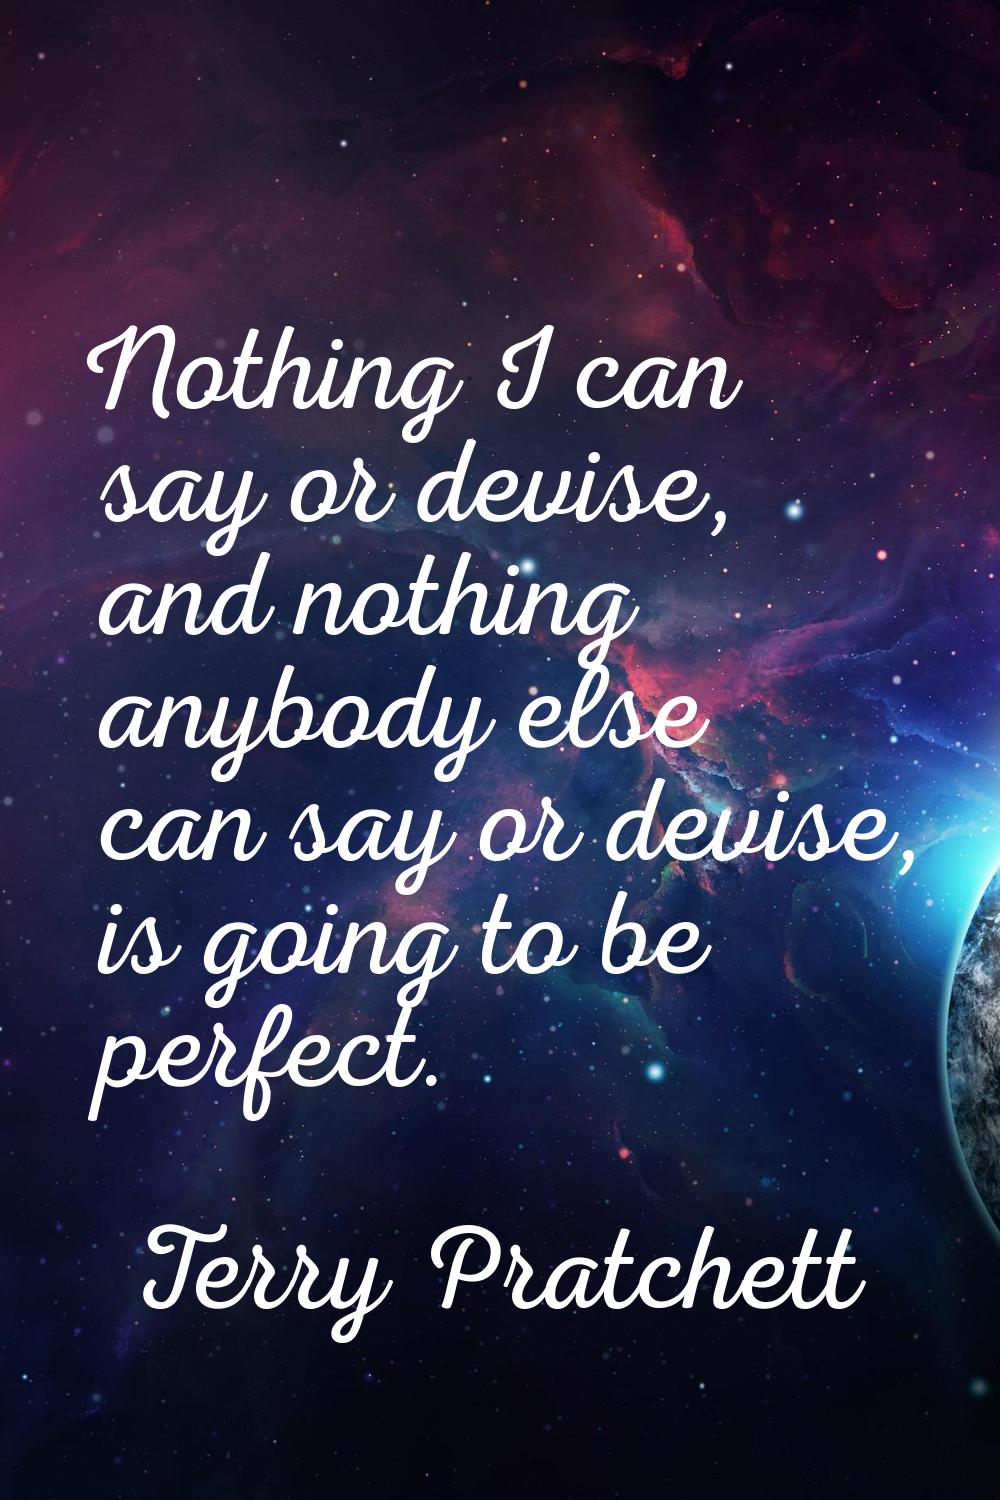 Nothing I can say or devise, and nothing anybody else can say or devise, is going to be perfect.